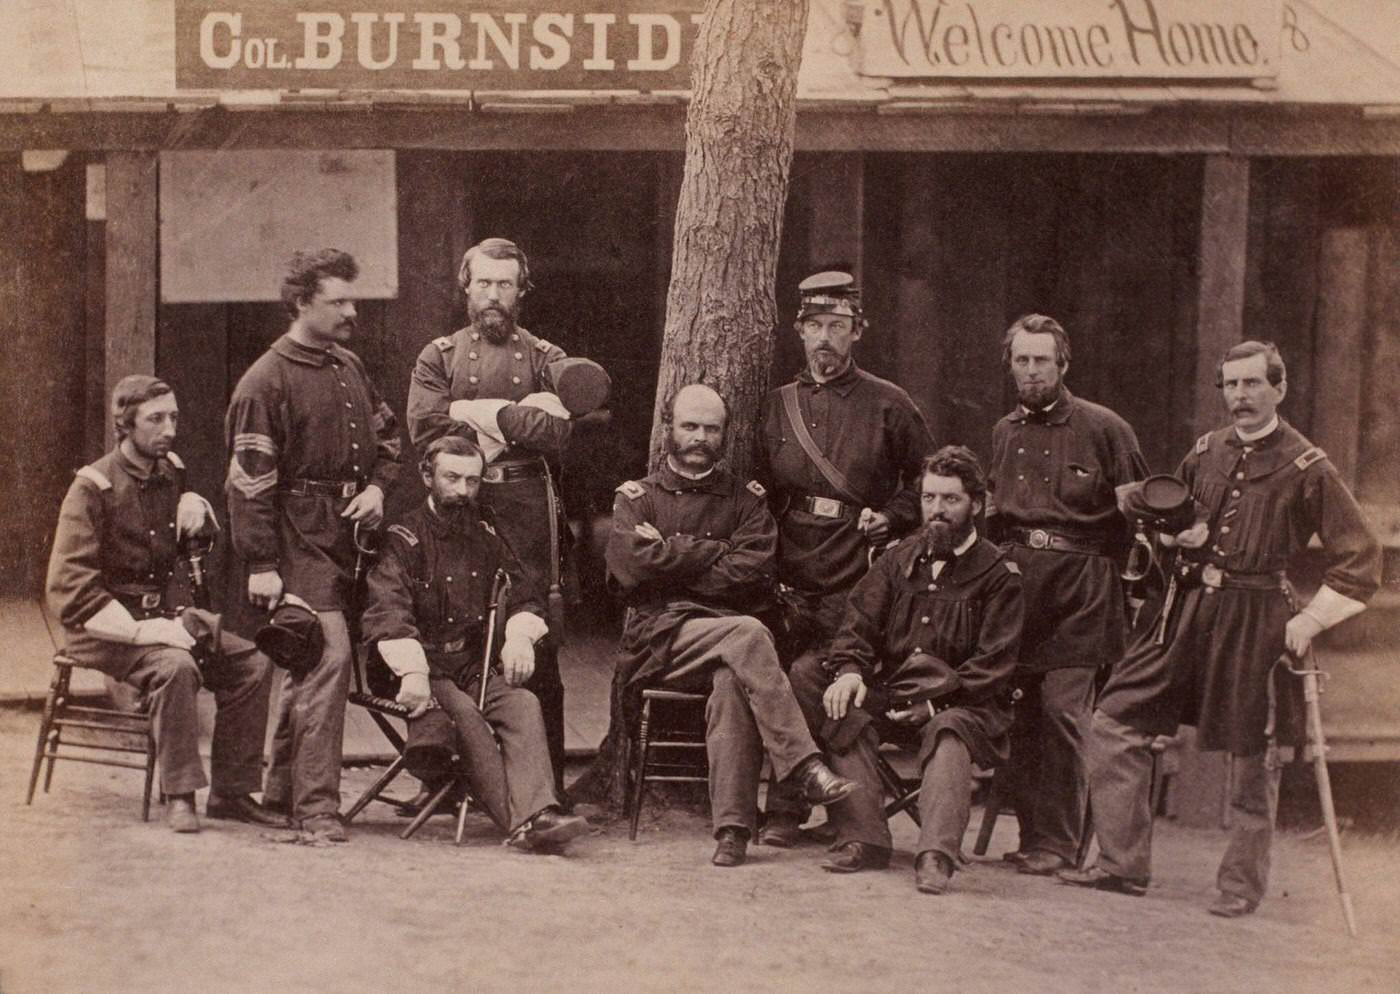 Portrait of Colonel Ambrose Burnside and his staff while he commanded the 1st Rhode Island Infantry Regiment in 1861.